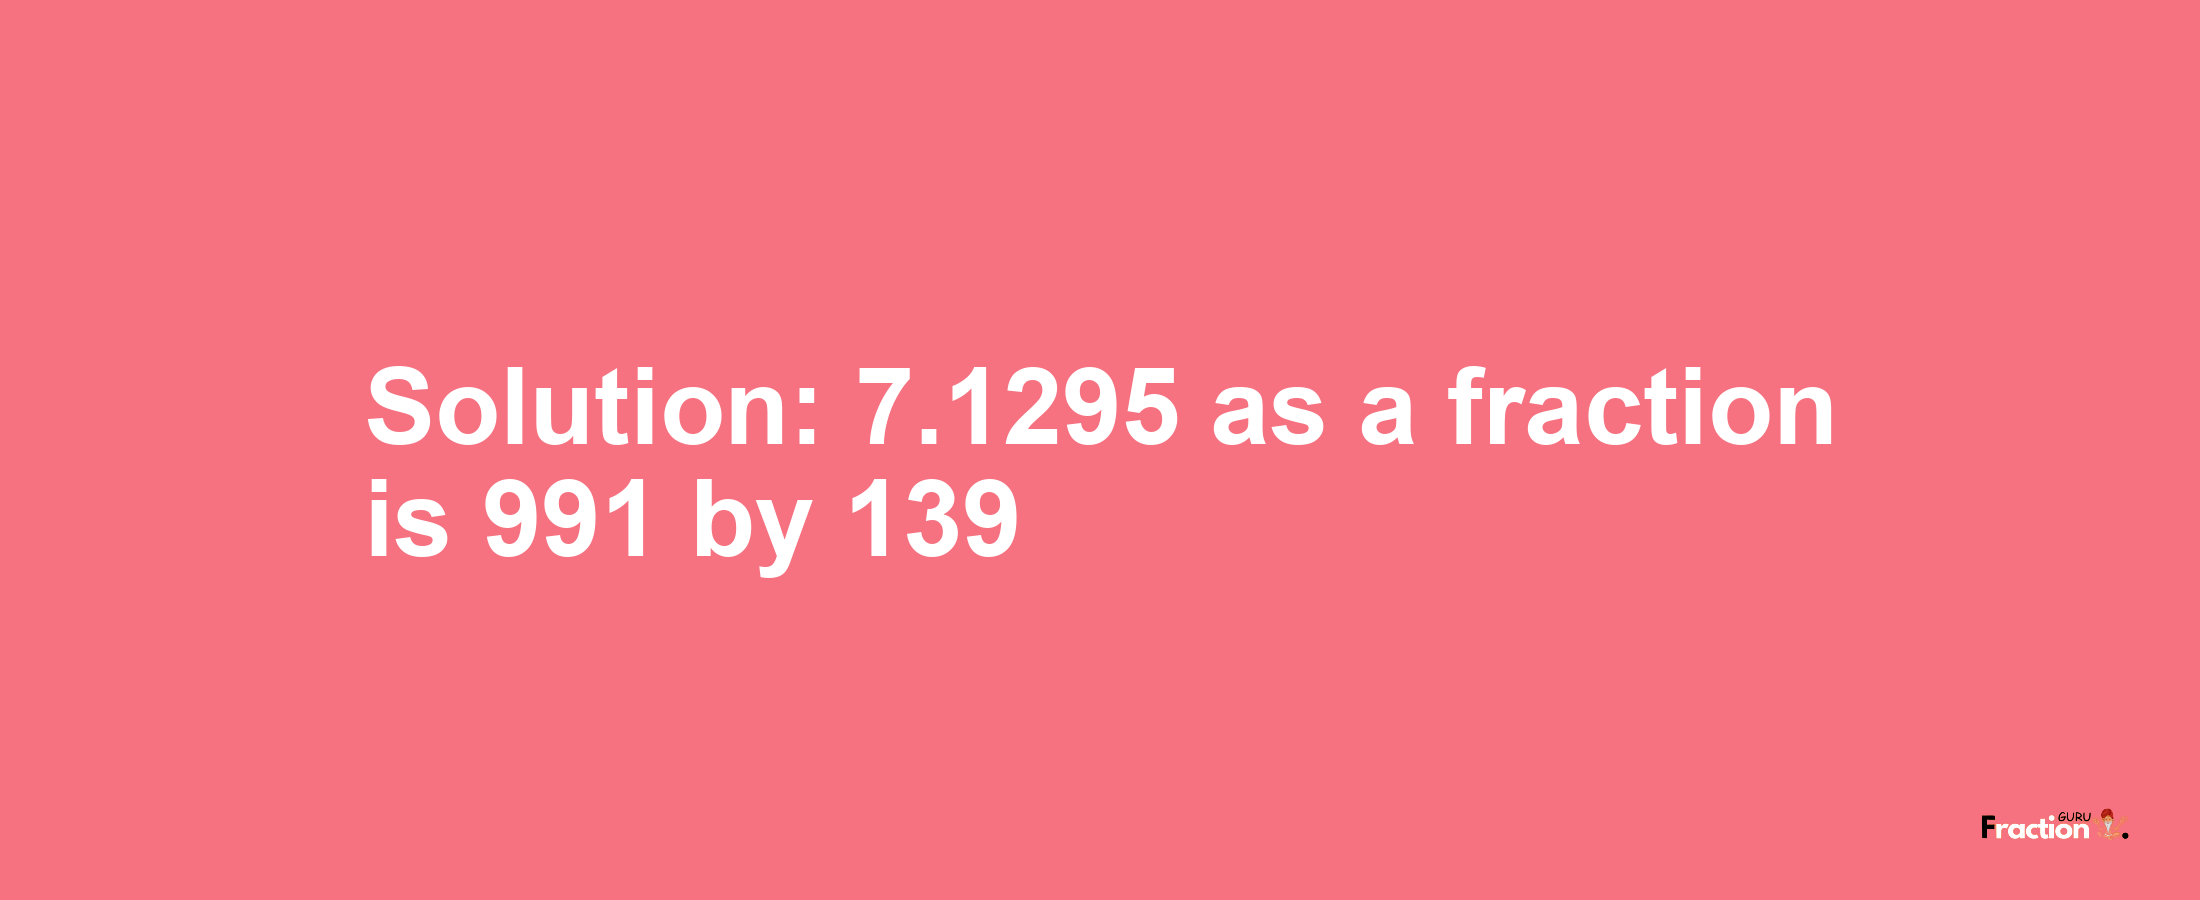 Solution:7.1295 as a fraction is 991/139